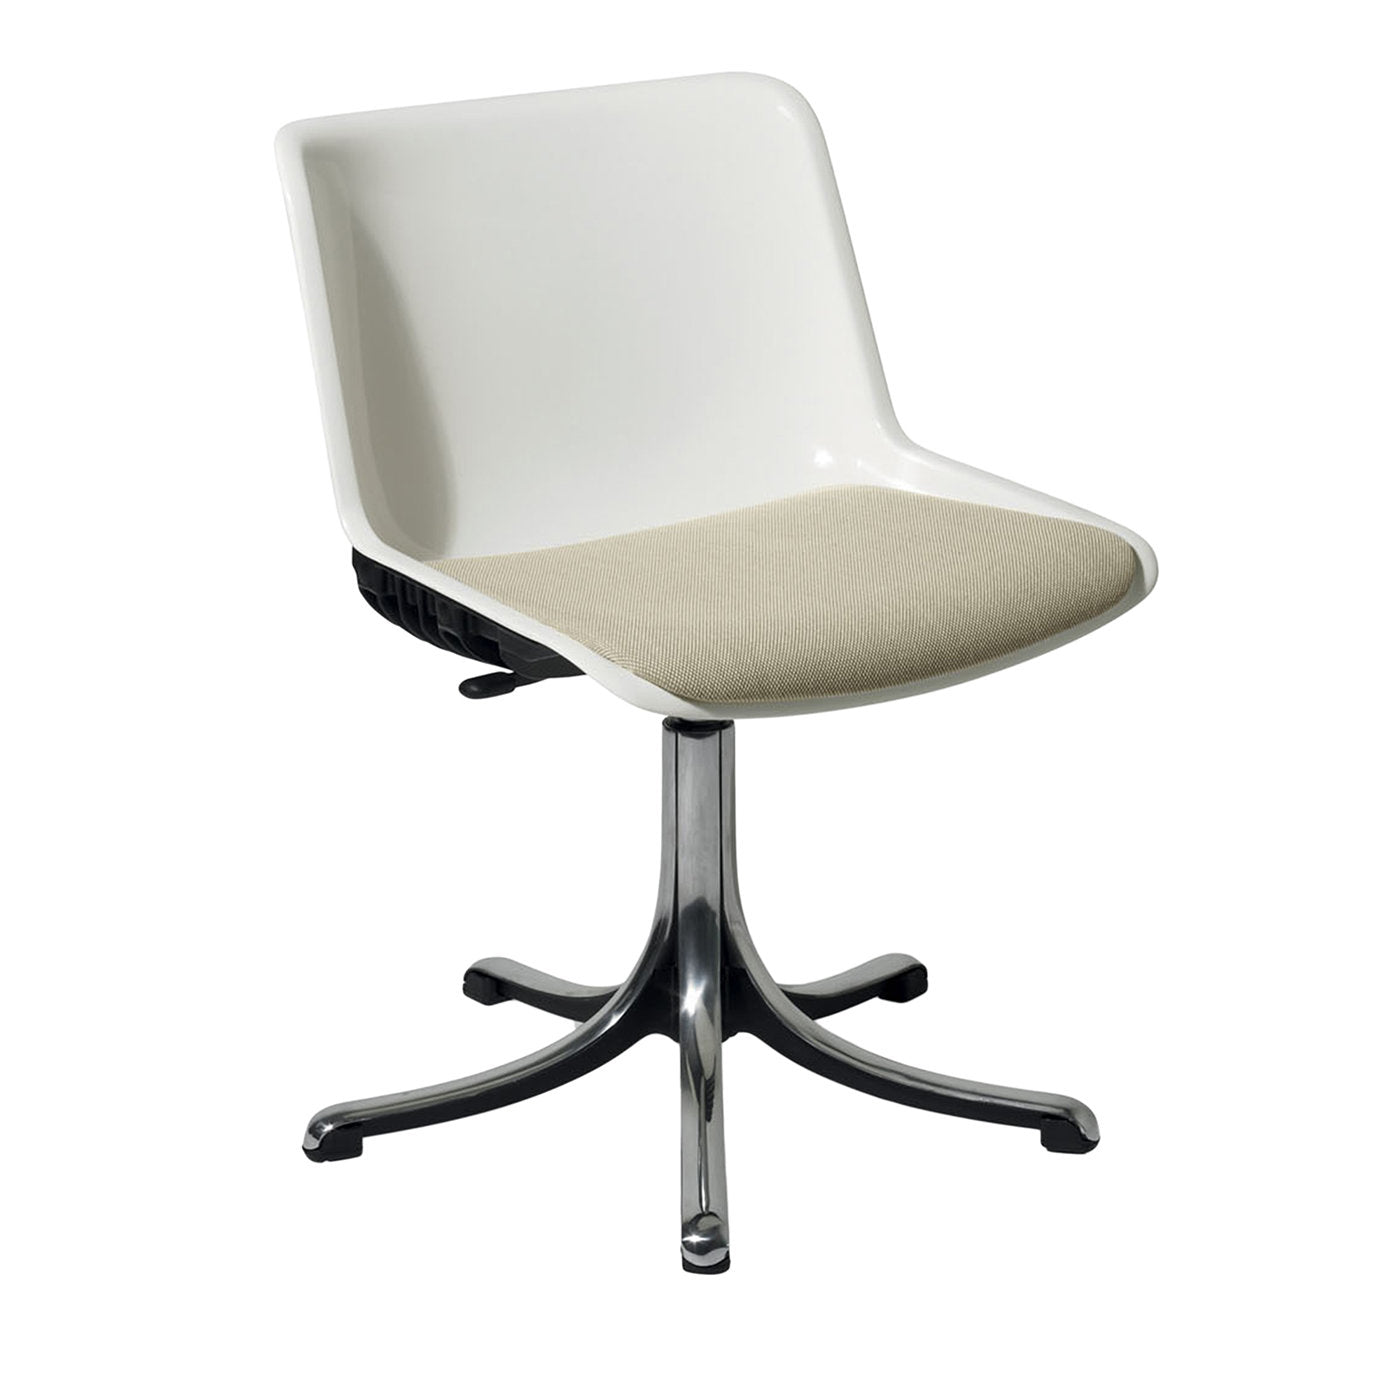 Modus White Chair with Gray Seat Cushion by Centro Progetti Tecno - Main view